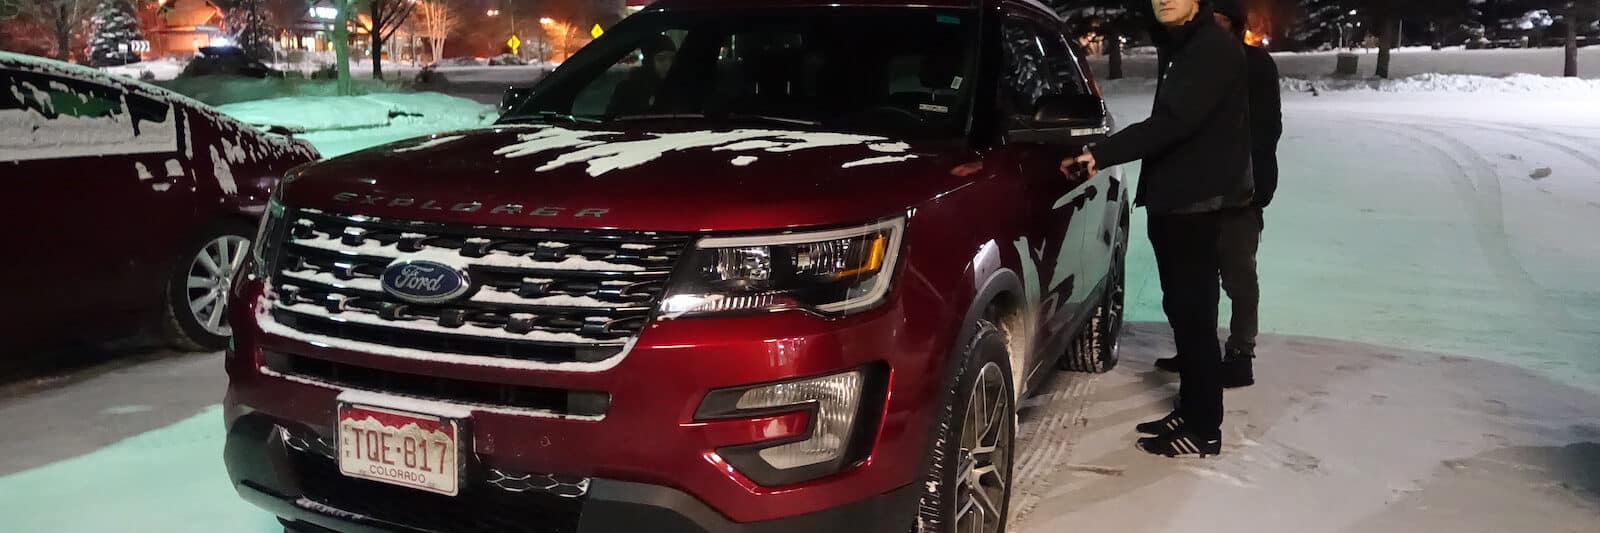 red SUV rental from Denver in Eagle, CO winter snow